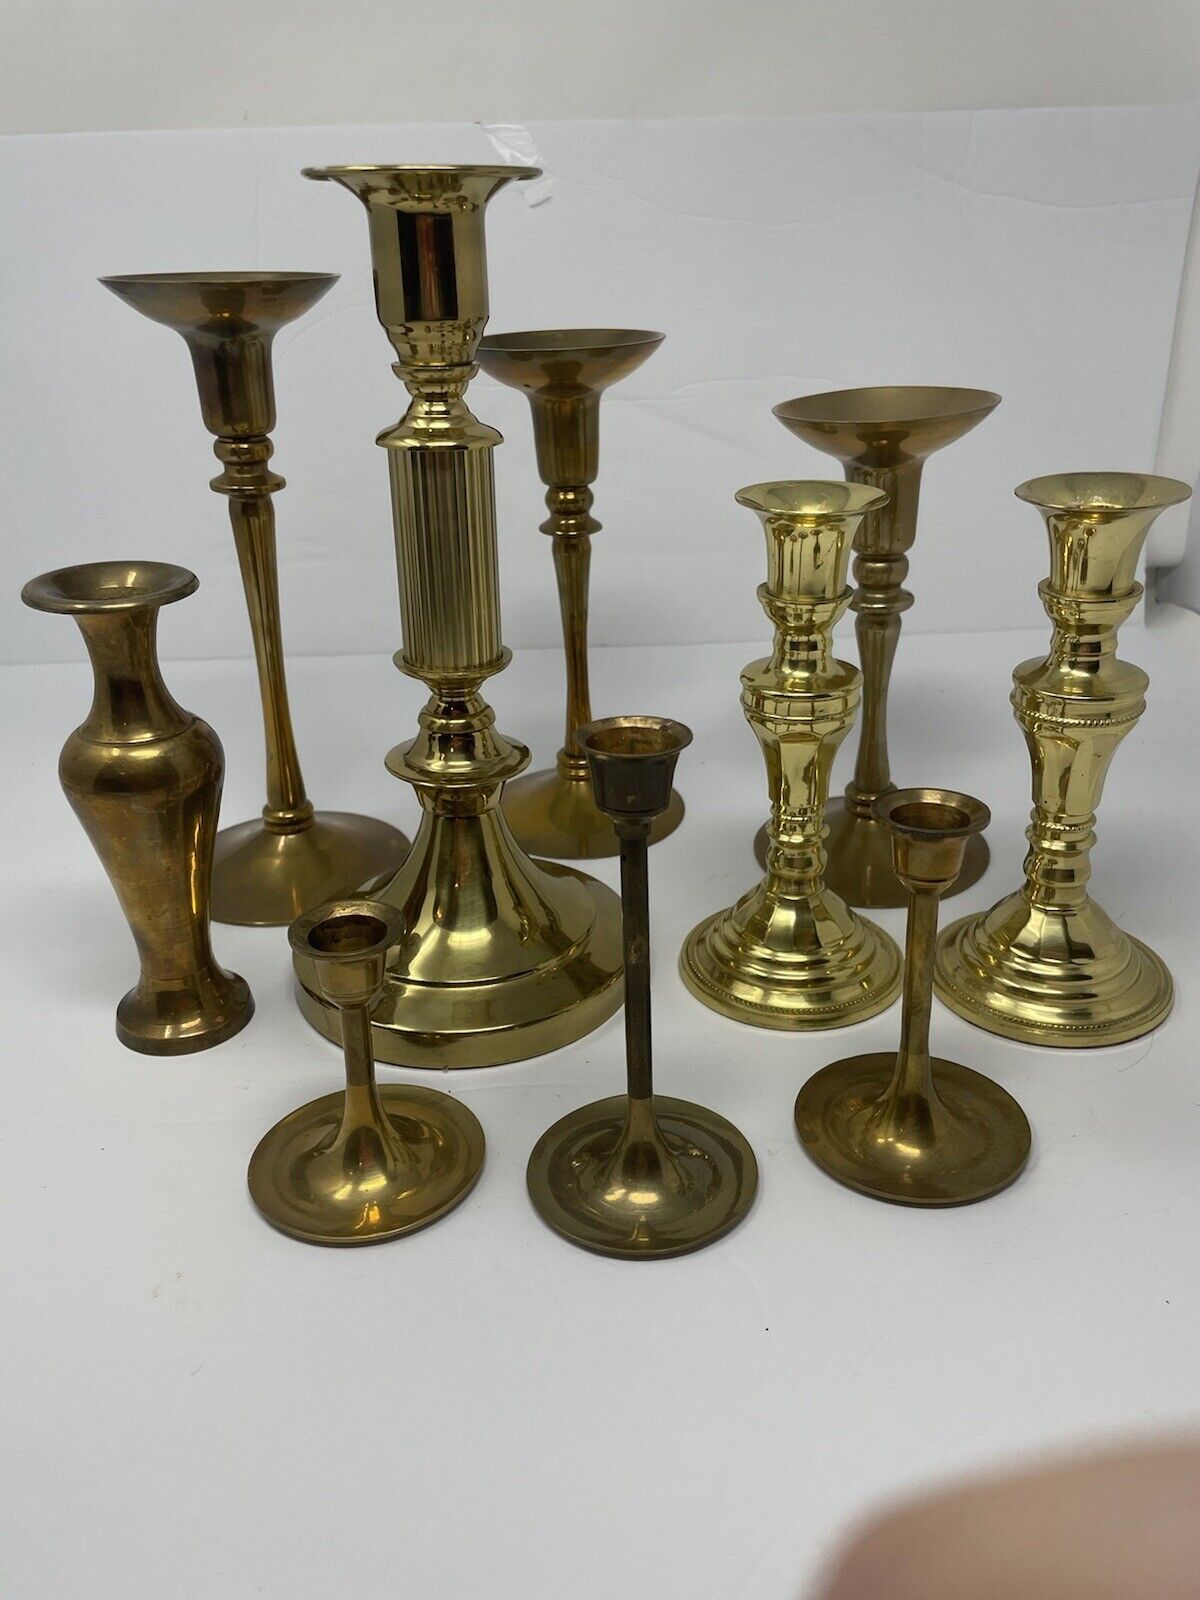 Solid Brass Candle Sticks/Holders Lot of 10 Various Sizes Pairs and Singles